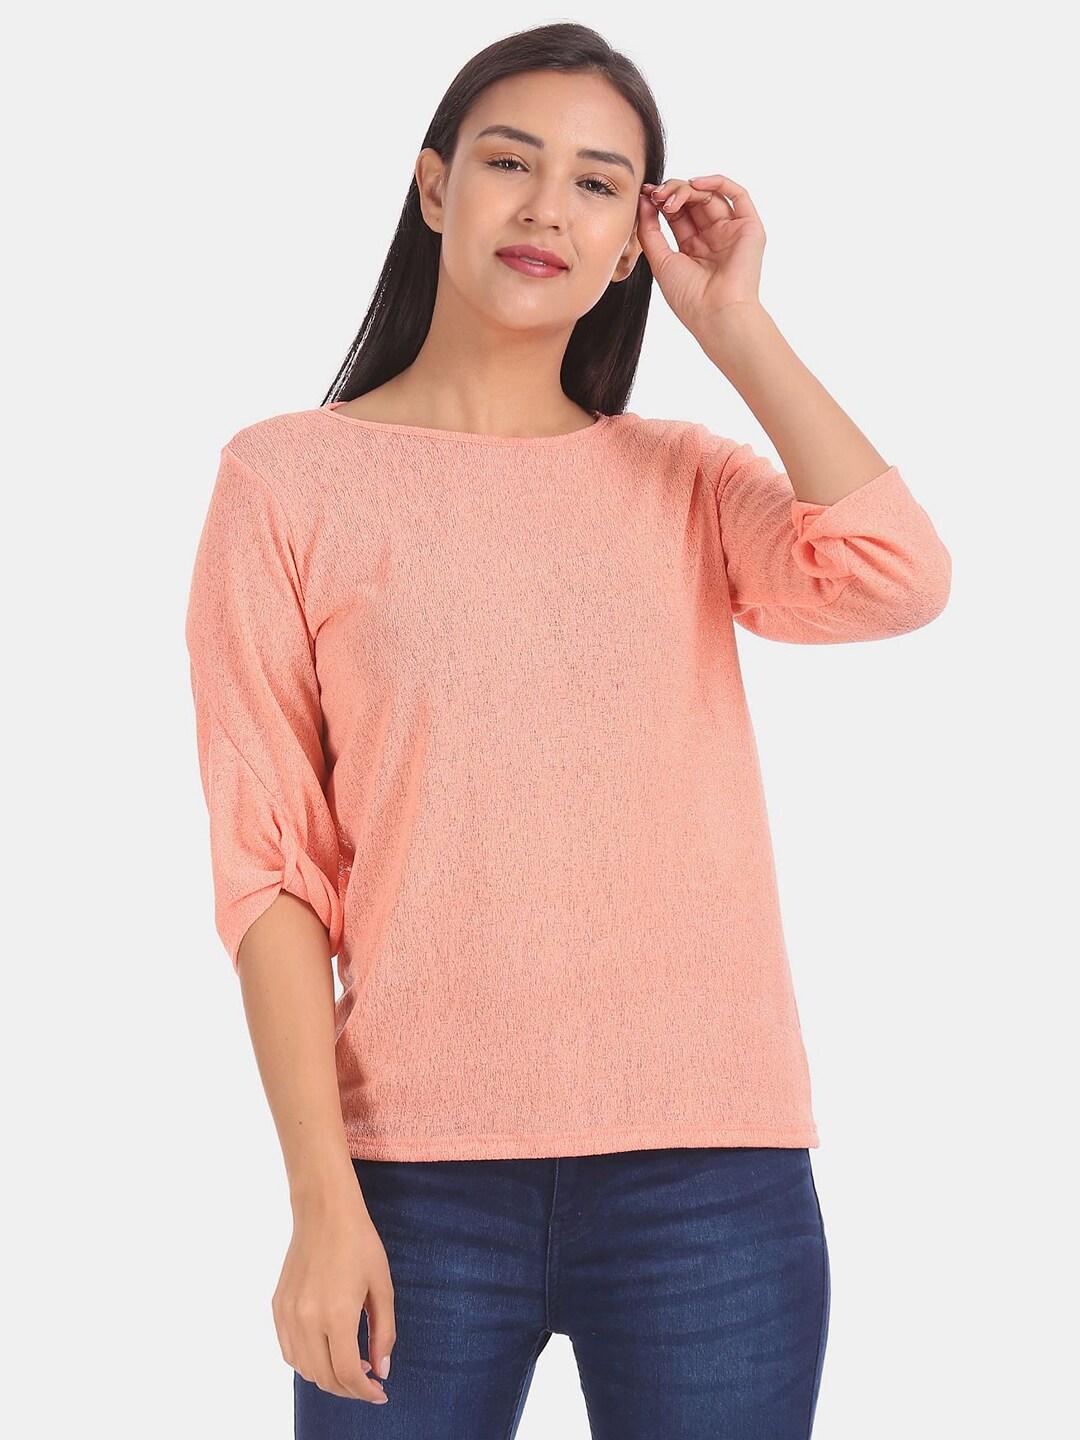 v-mart roll-up sleeves top